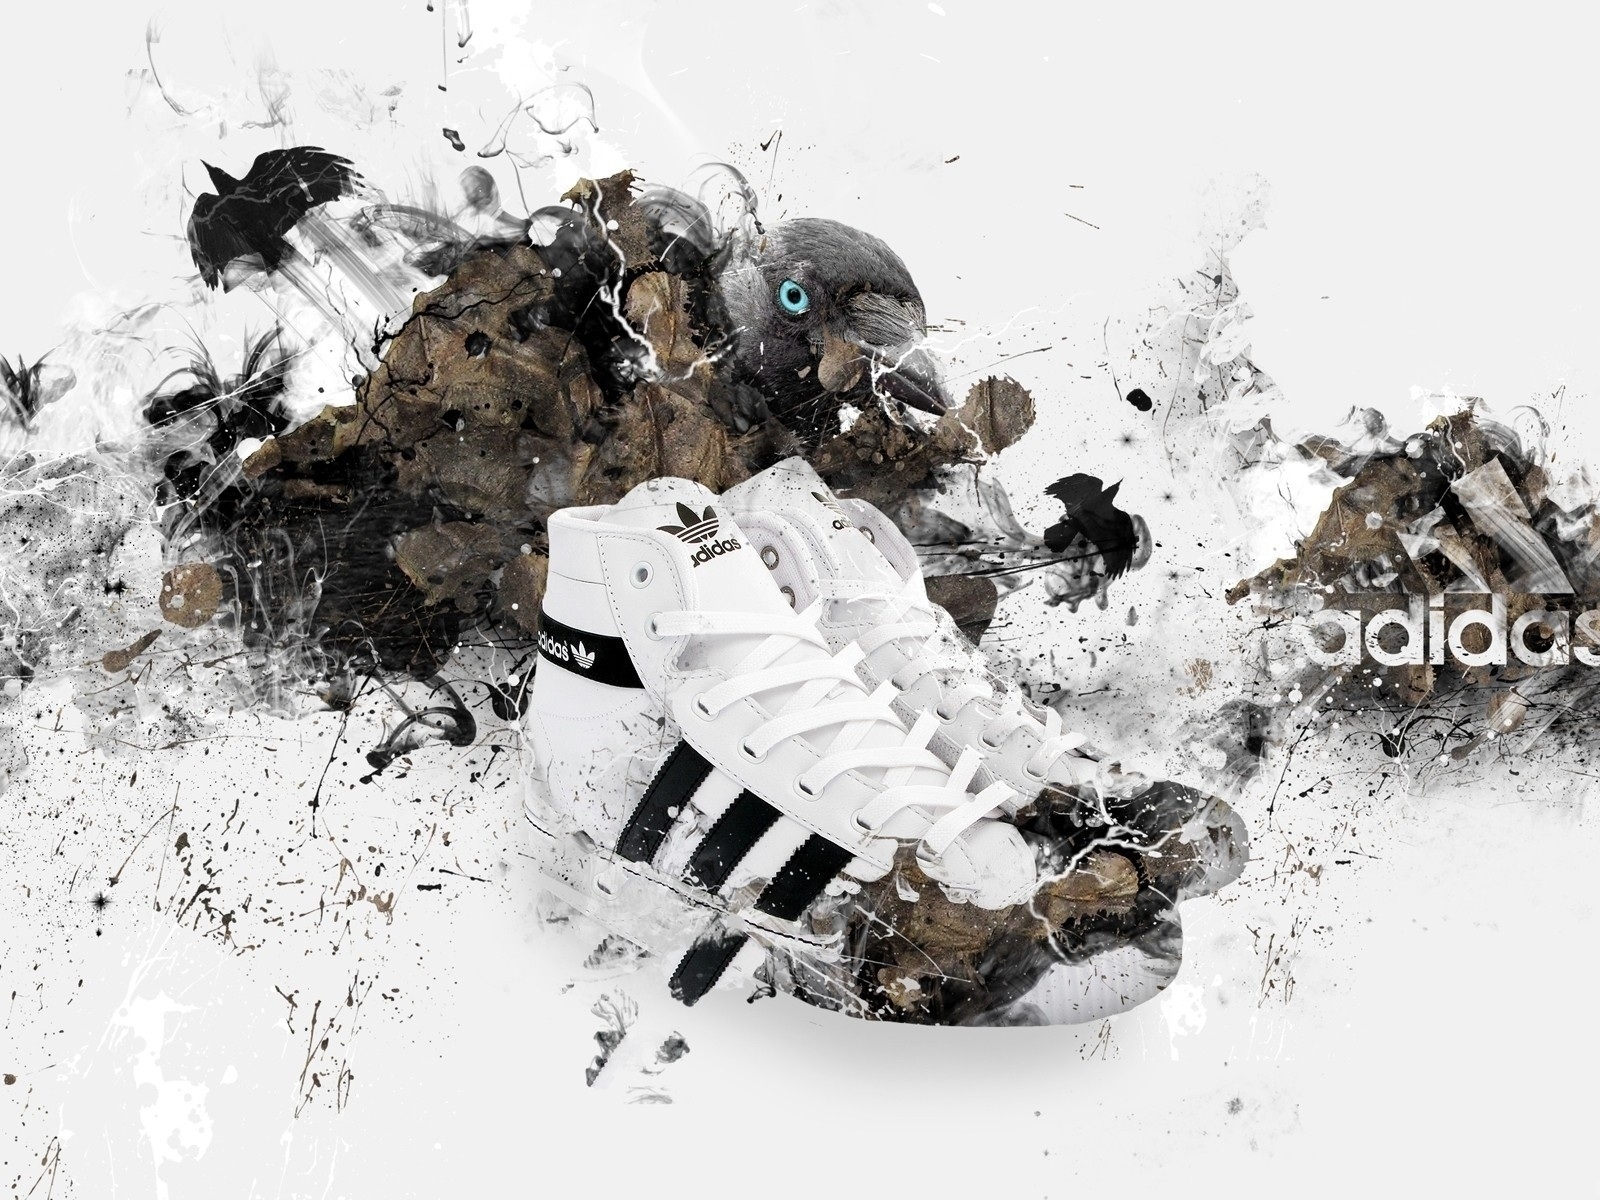 Adidas Shoes for 1600 x 1200 resolution